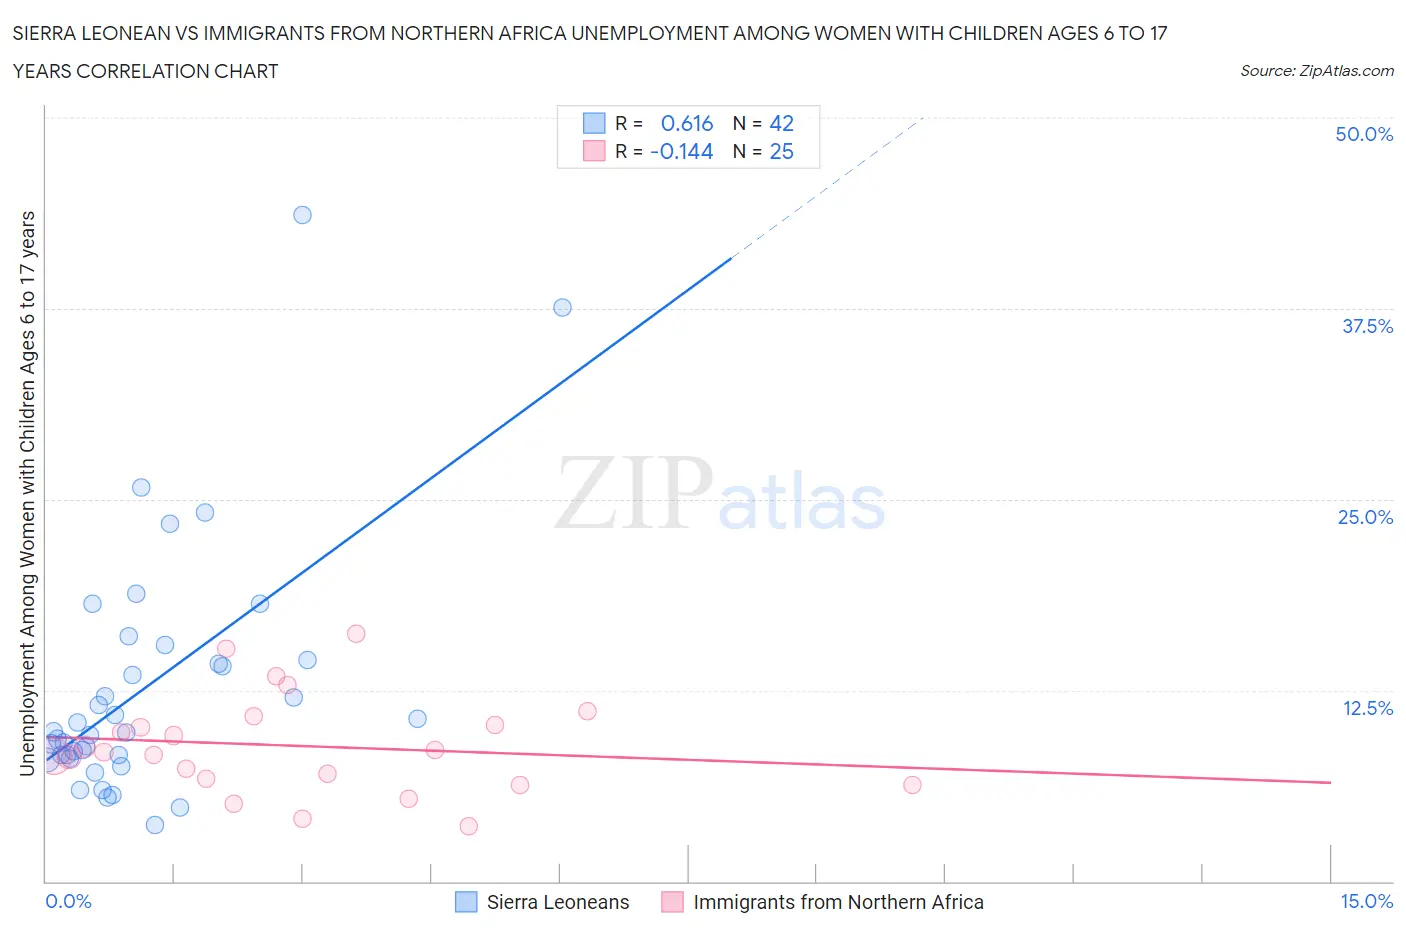 Sierra Leonean vs Immigrants from Northern Africa Unemployment Among Women with Children Ages 6 to 17 years